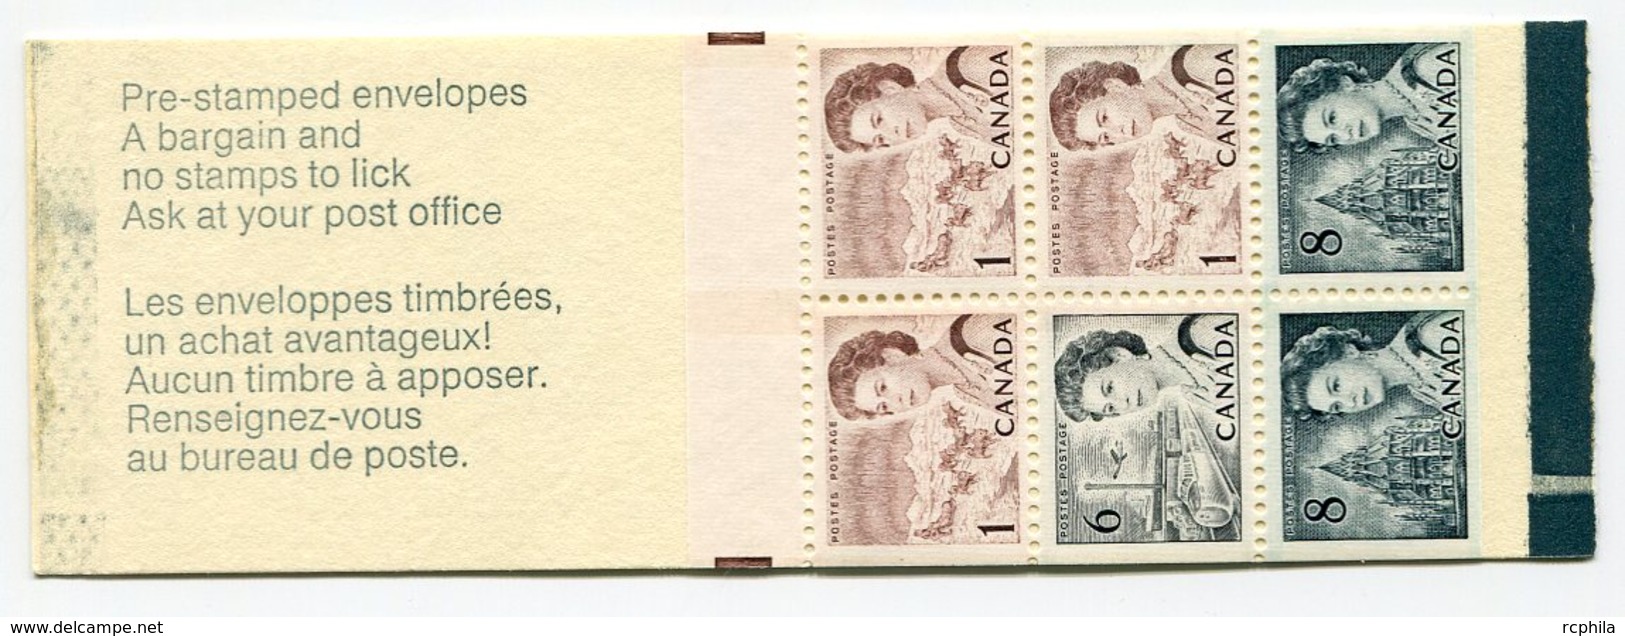 RC 15899 CANADA BK69 QUEEN ELIZABETH II CARNET COMPLET BOOKLET MNH NEUF ** - Carnets Complets